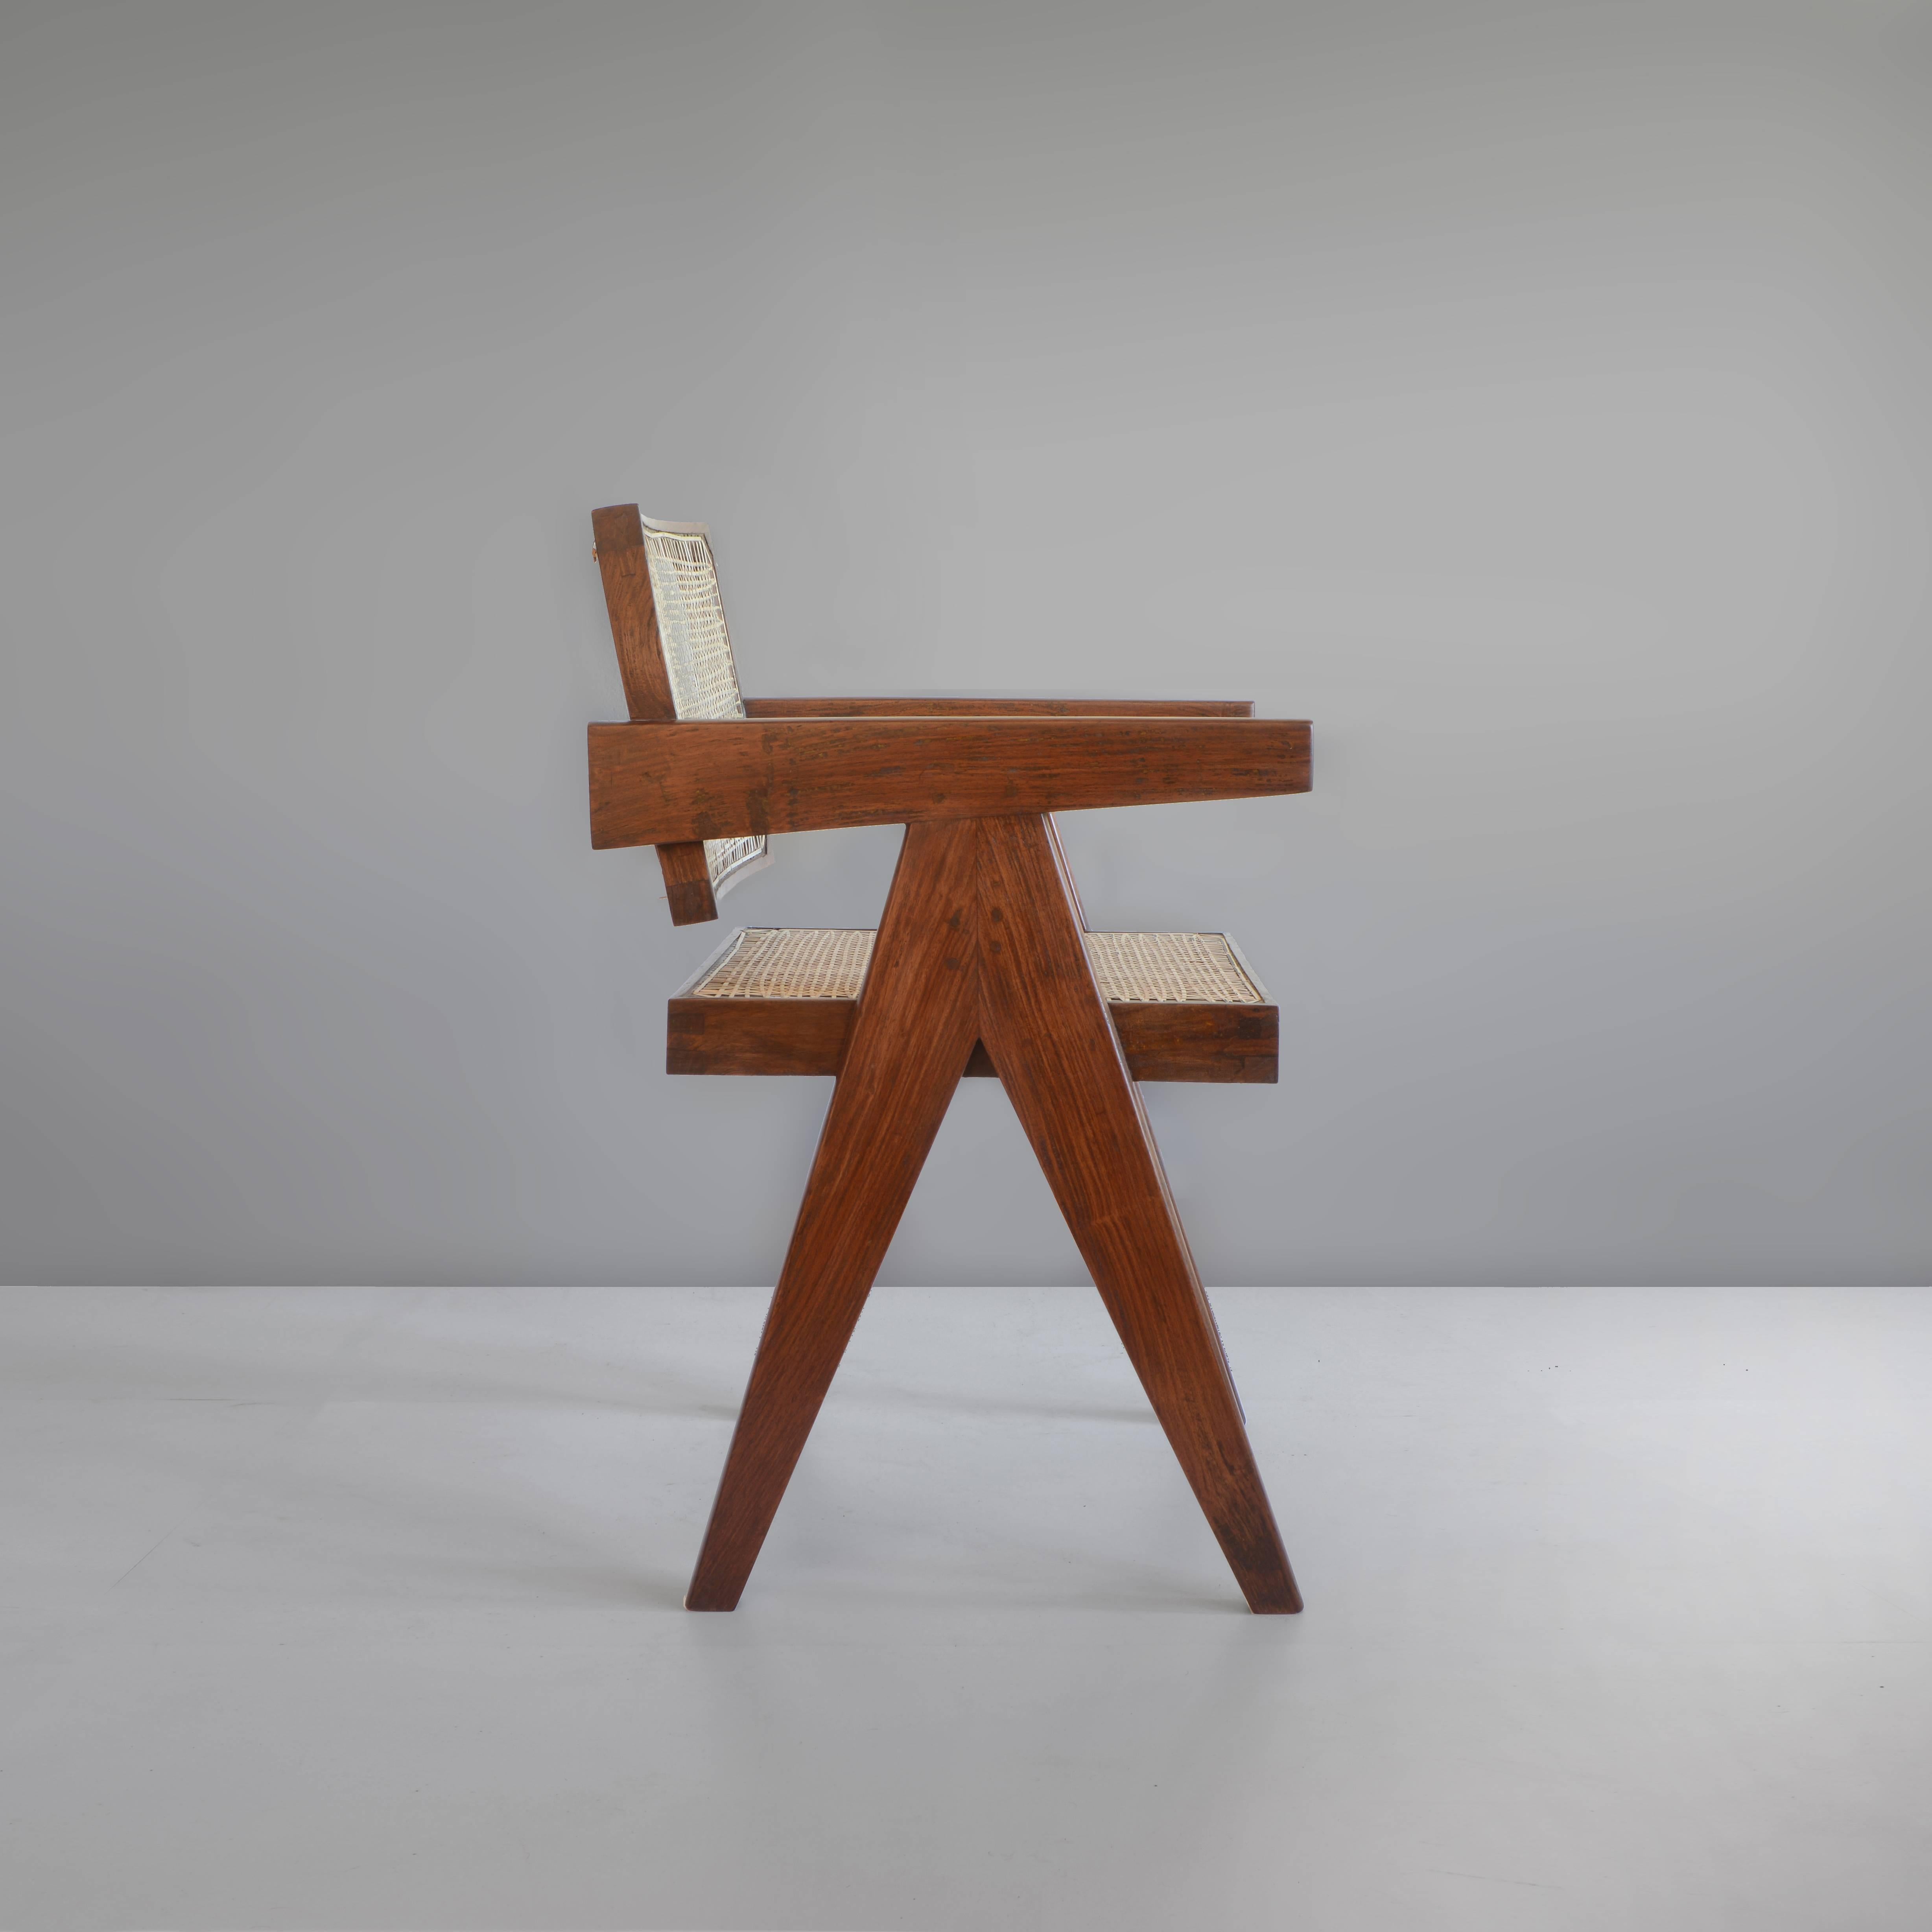 The chair is done in teak. With a free backseat it has a fantastic shape and is an iconic piece of design. Cane has been redone in 2016. All other parts are original. Softly waxed, not lacquered, so wood keeps its natural look. From bottom we keep